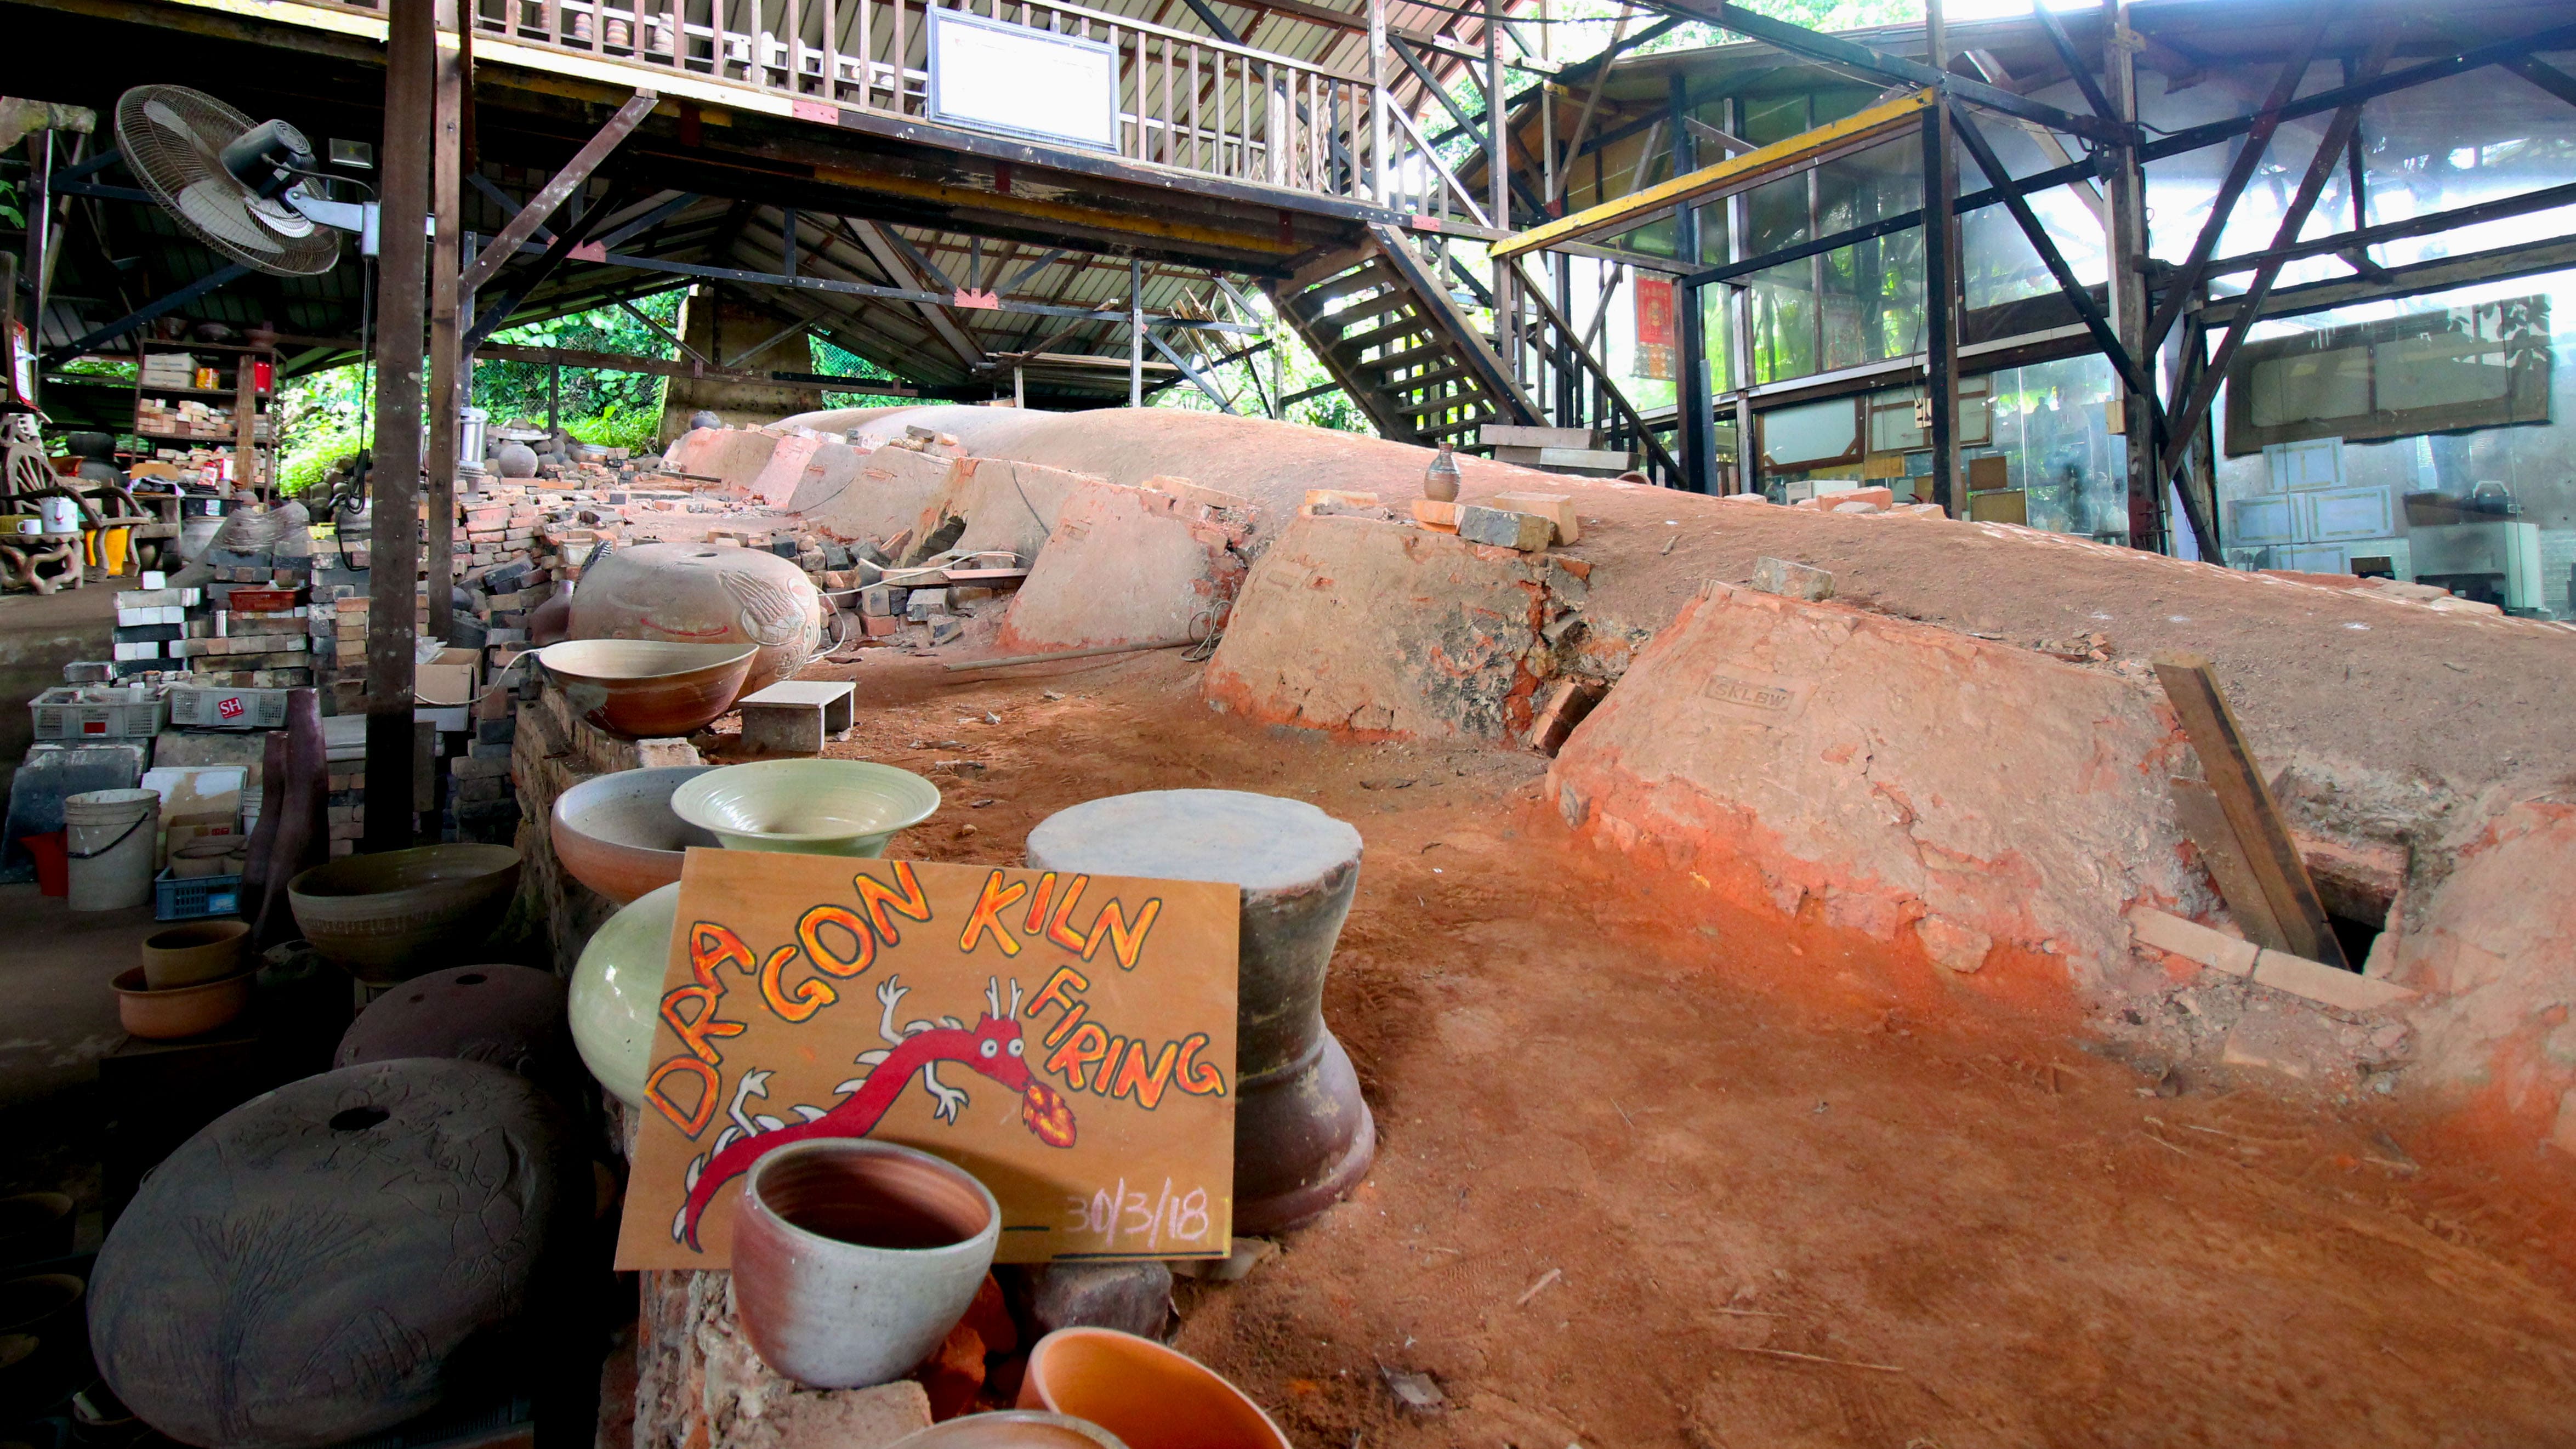 In the western end of Singapore, blissfully sheltered from the bustle of the city, Thow Kwang Pottery Jungle is home to the island’s oldest surviving wood-fired “dragon” kiln, so named for its distinctive, snaking structure. Photo by Lin Yanqin	